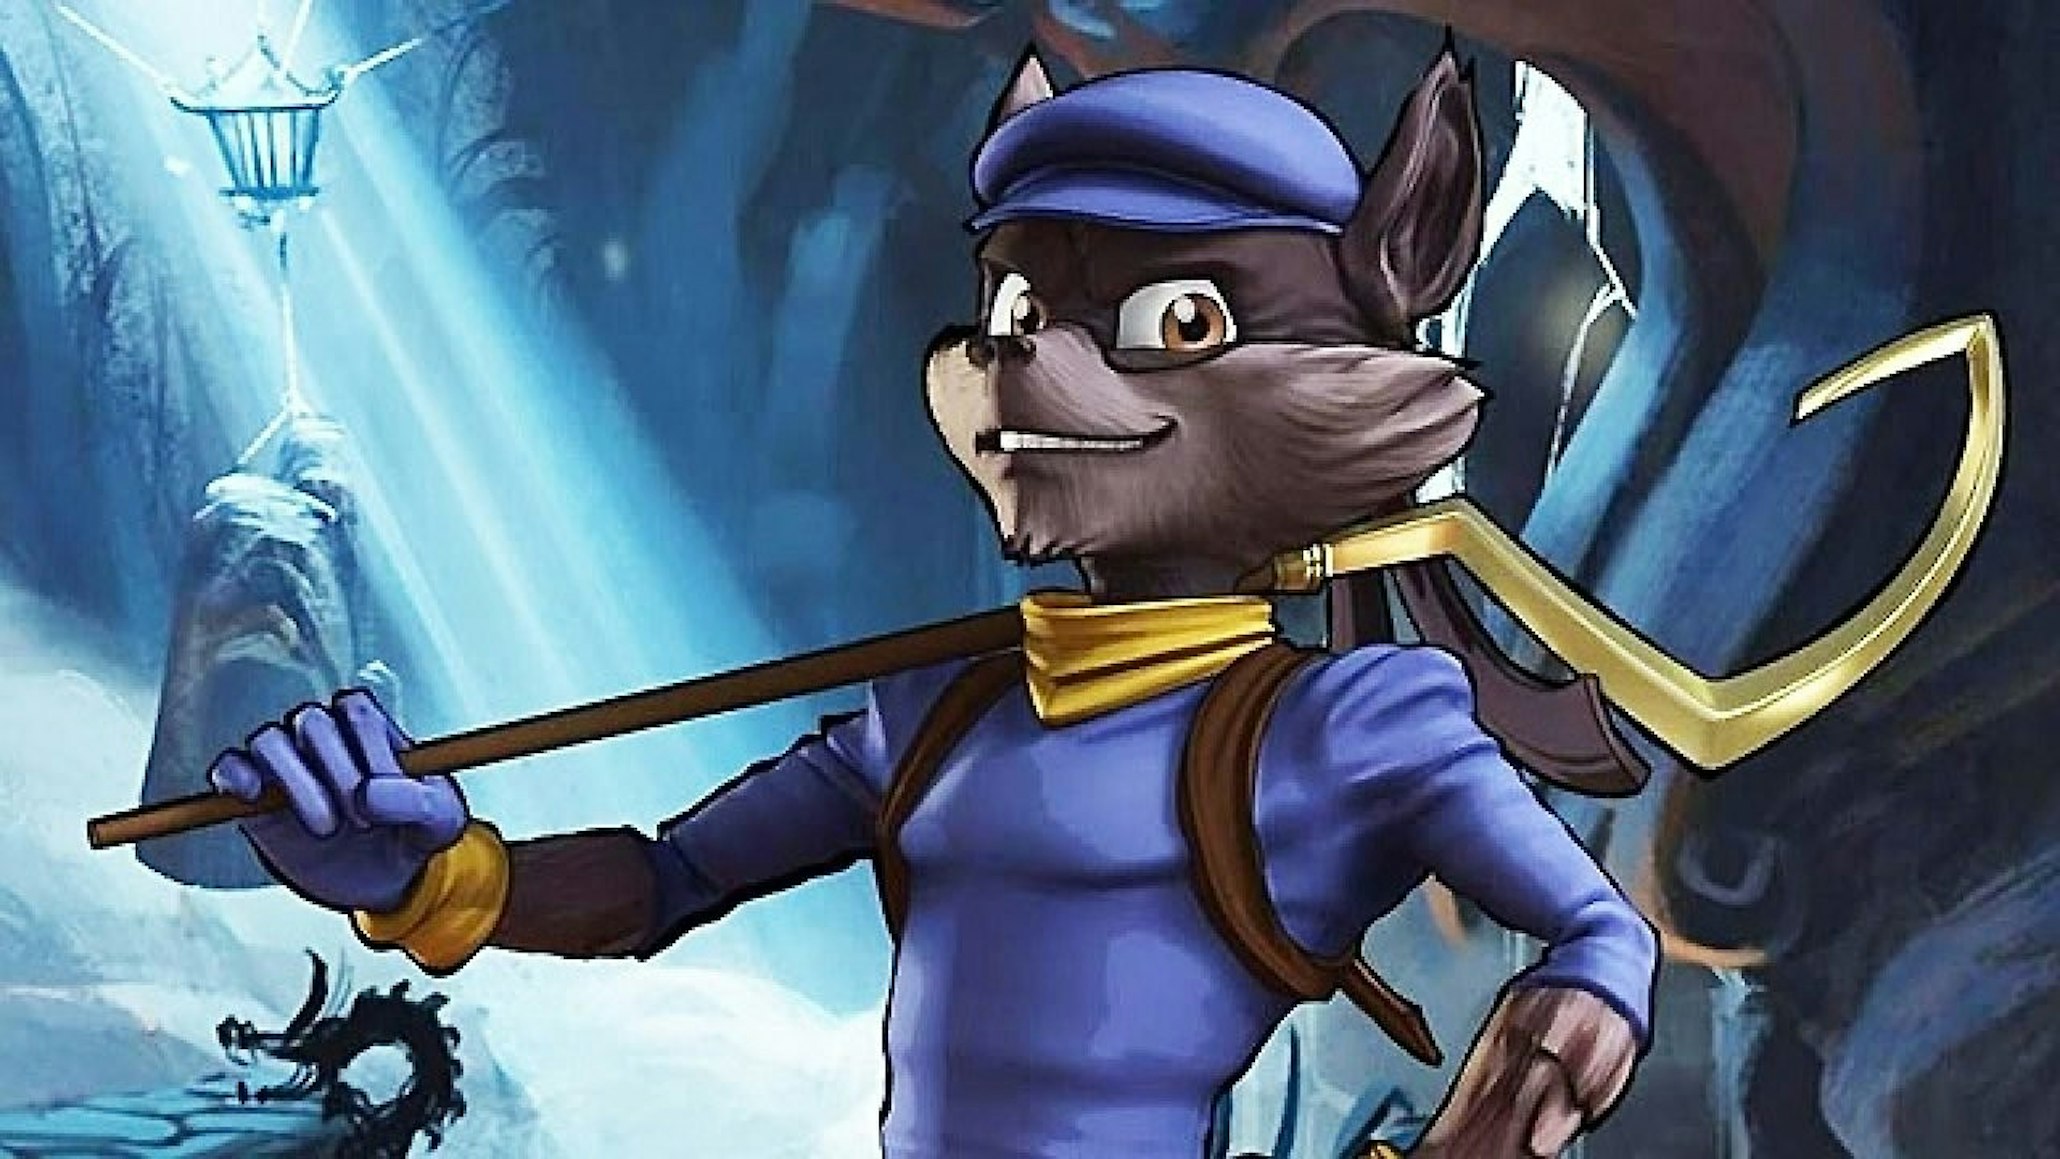 Sly Cooper: Thieves In Time Animated Short [Full] 